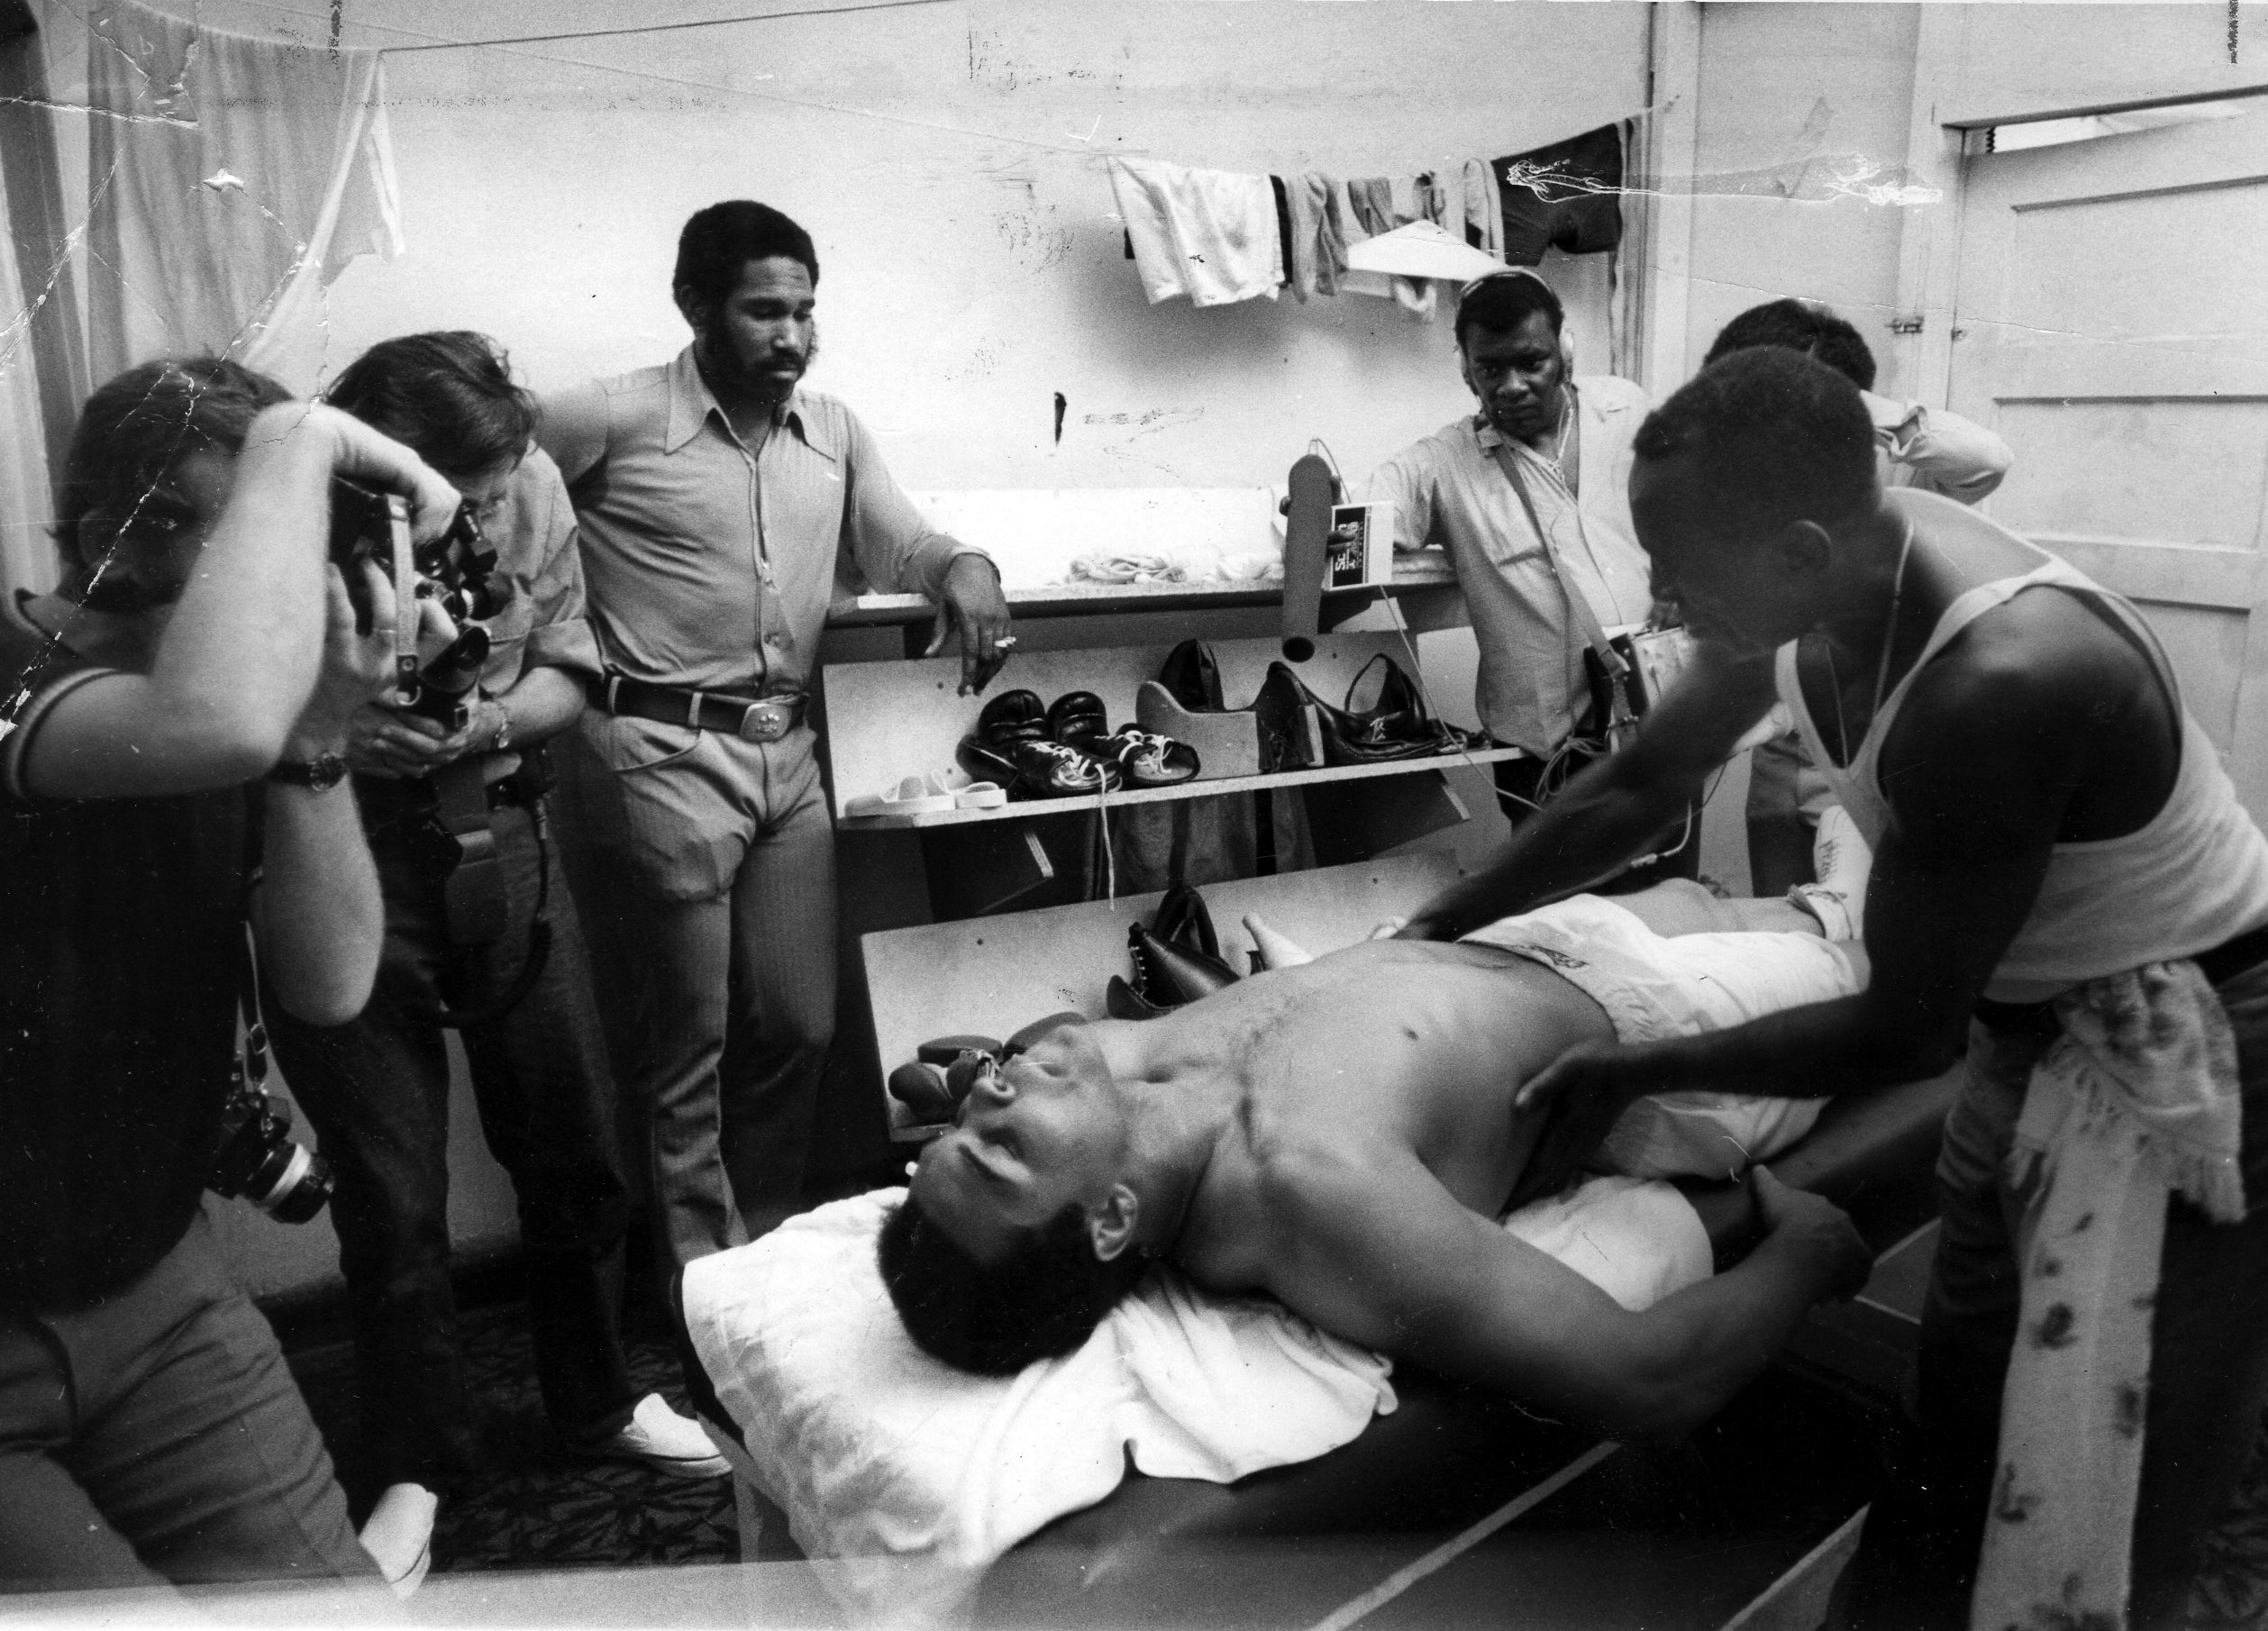 Feb. 25, 1971 - Florida, U.S. - February 25, 1971: Muhammad Ali gets a rub down by Luis Sarria after working out in Miami Beach's 5th Street gym., Image: 256440932, License: Rights-managed, Restrictions: * Florida Sun Sentinel Rights OUT *, Model Release: no, Credit line: Profimedia, Zuma Press - News